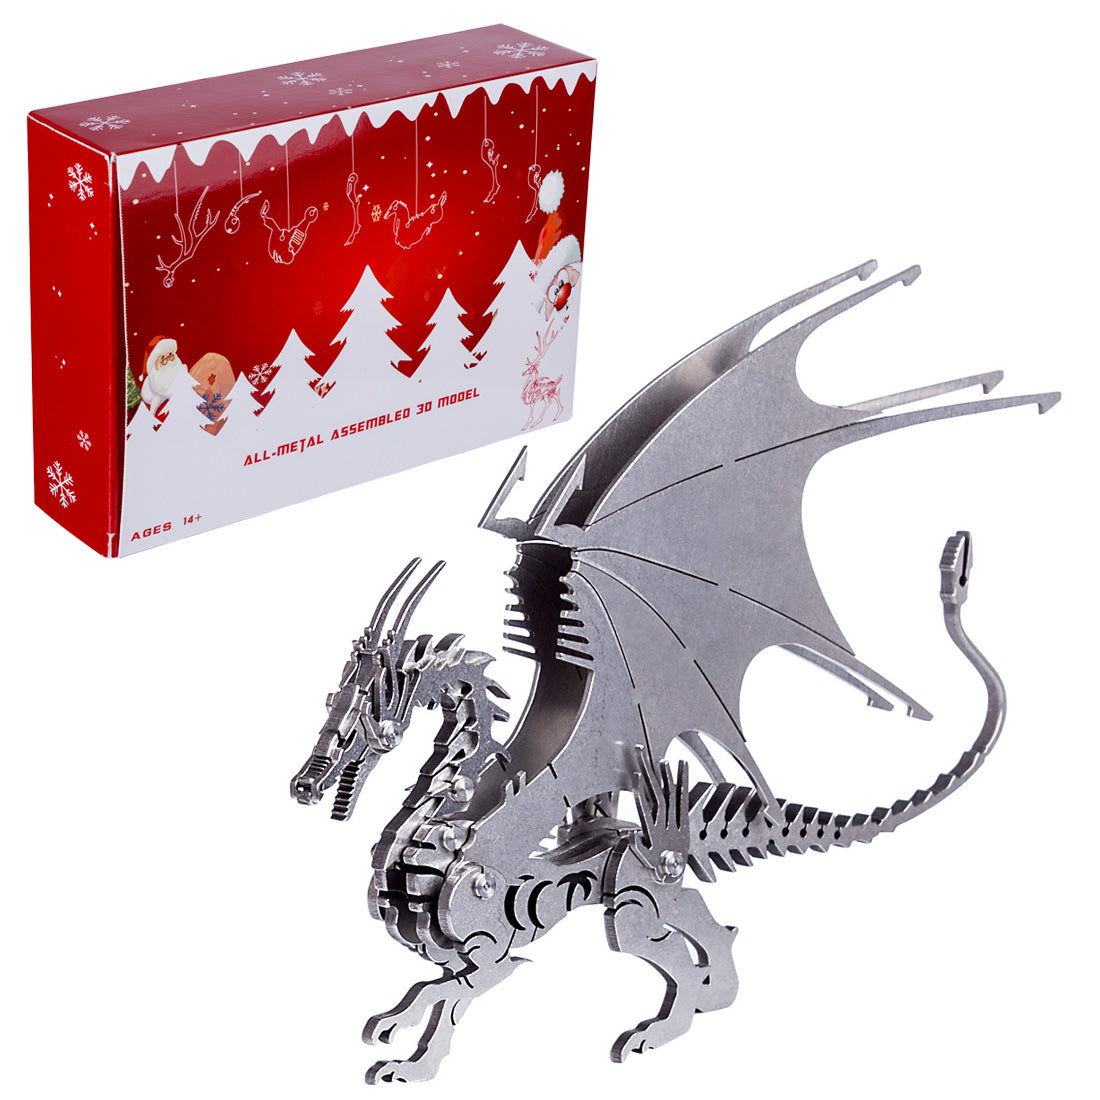 Stainless Steel Scorpion Spider Elk Horse Pterosaur Puzzle Model Kit with Christmas Packing